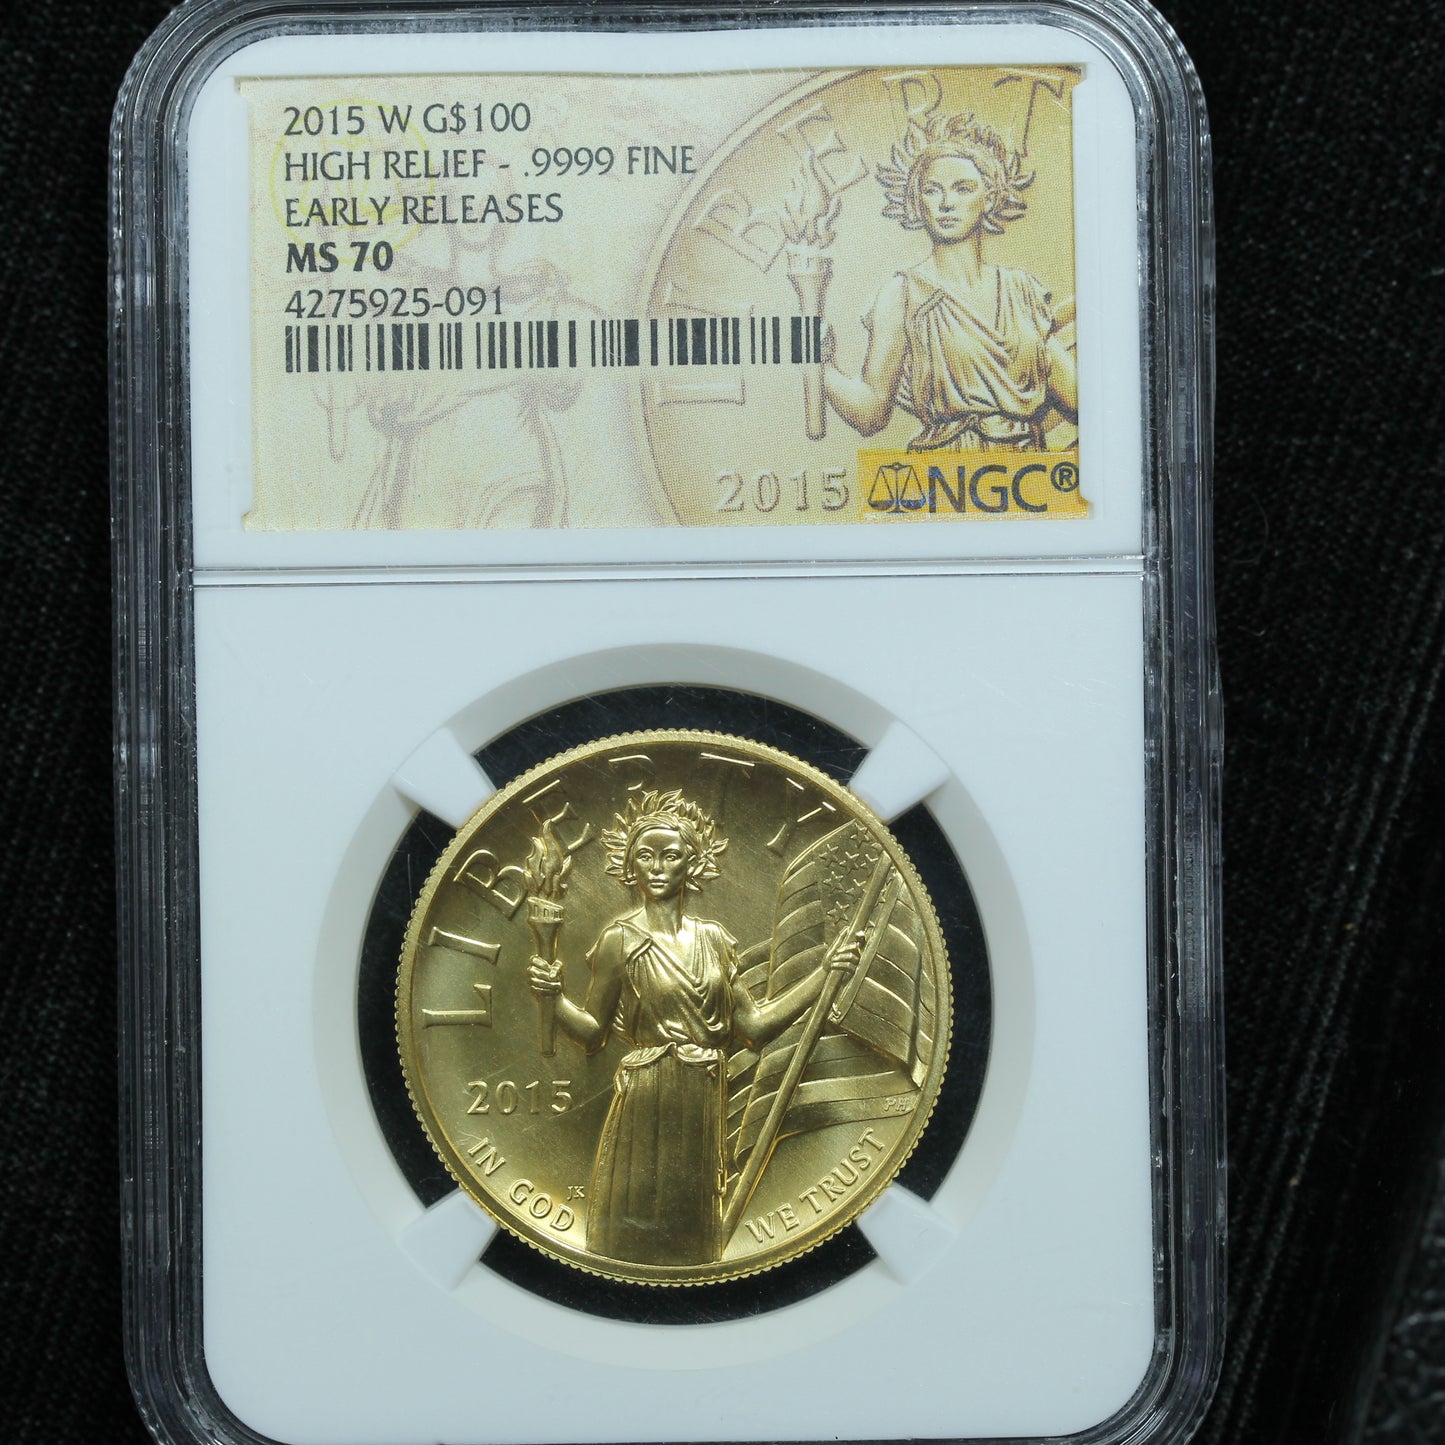 2015 W G$100 American Liberty High Relief NGC MS 70 ER Gold 1 oz